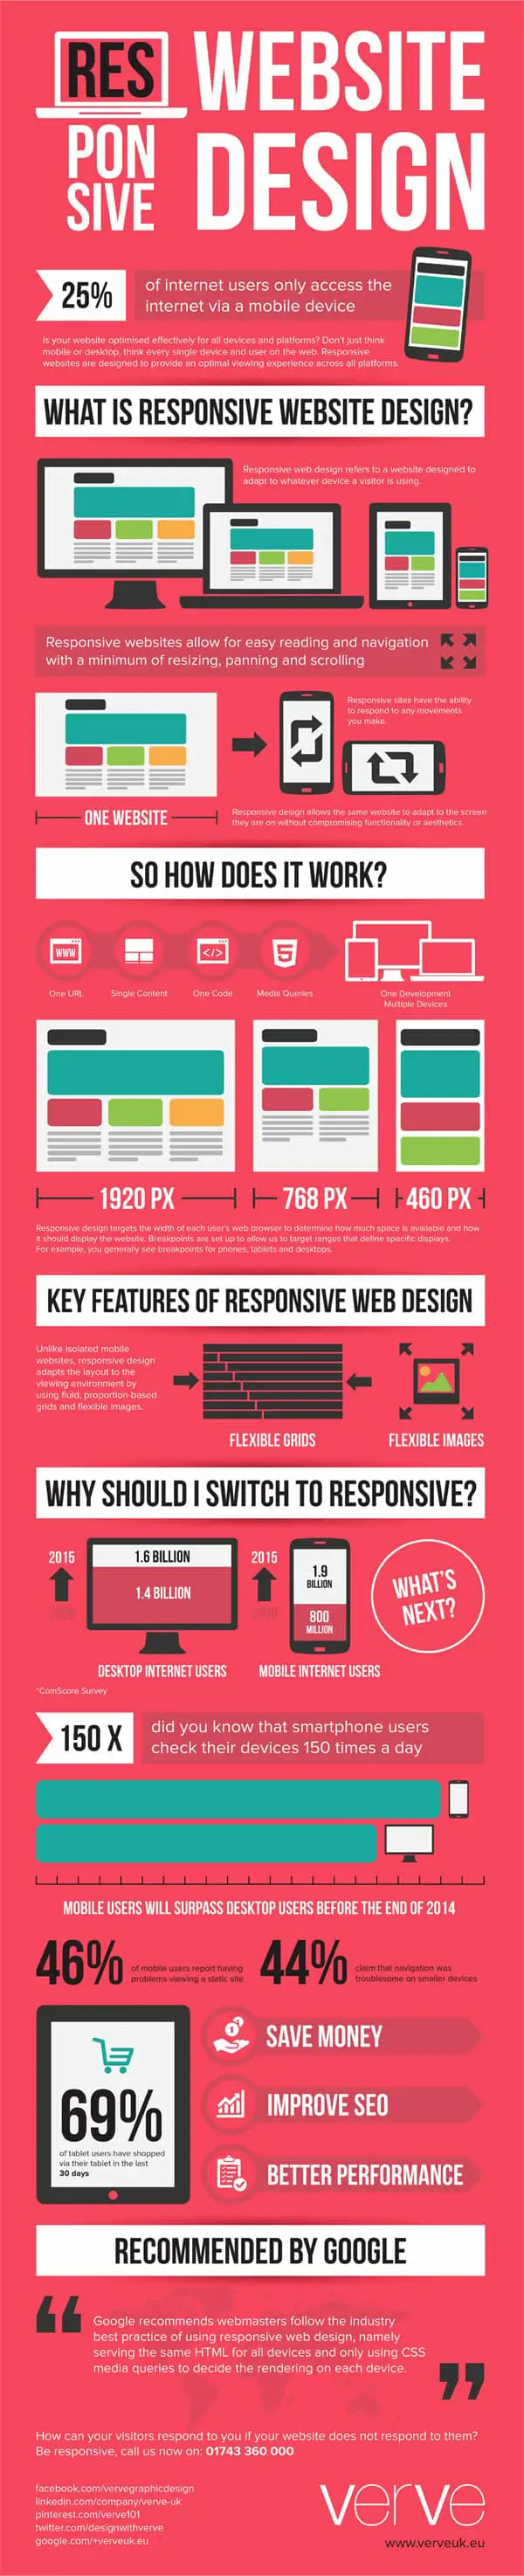 What is Responsive Website Design by Verve